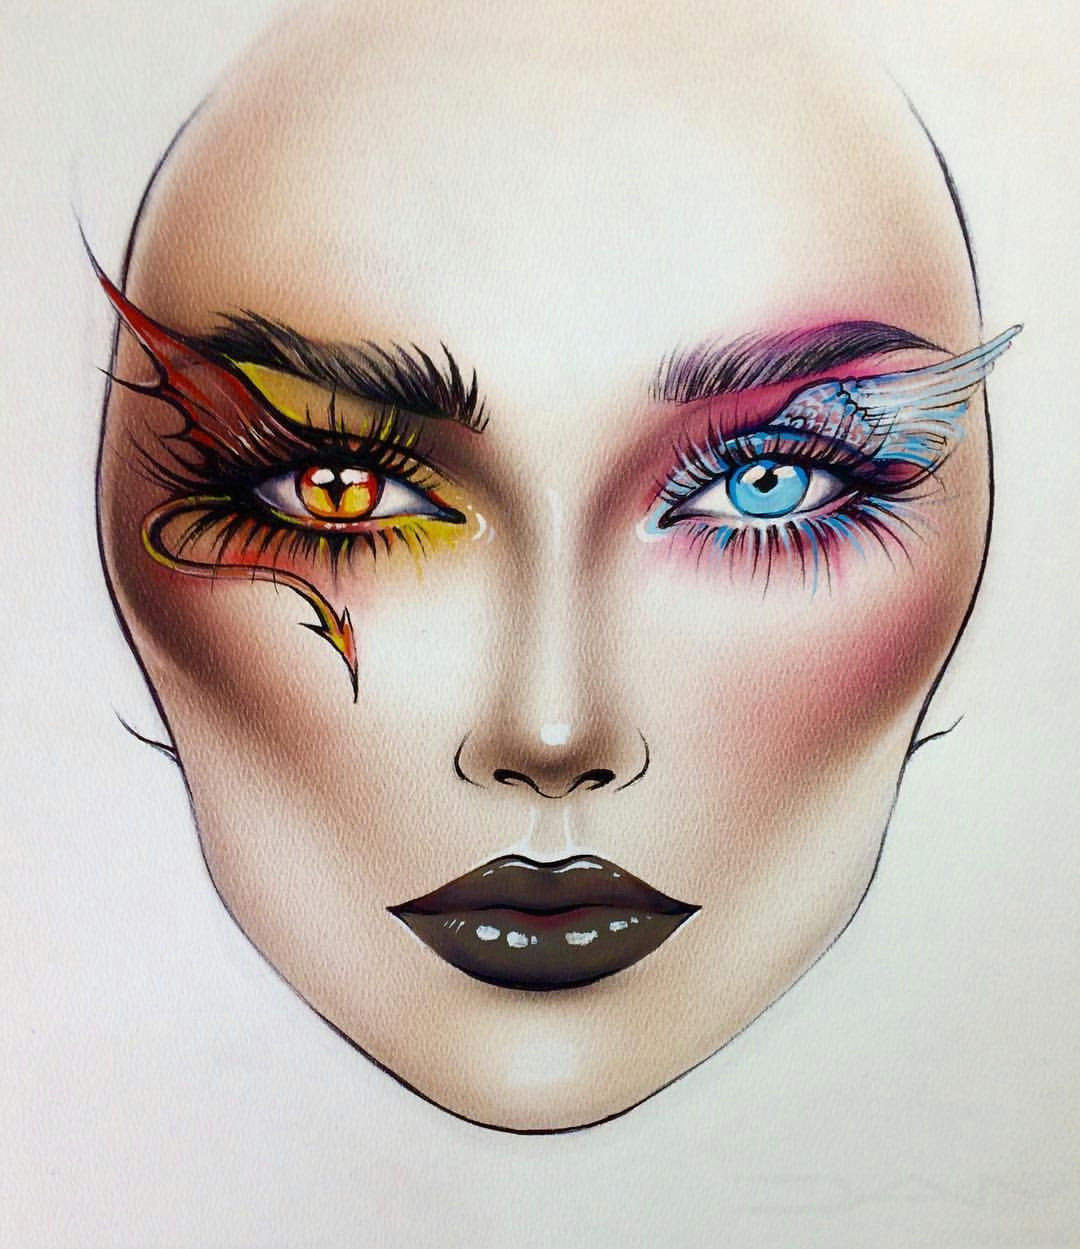 Makeup Girl Drawing 9 663 Likes 54 Comments Sergey X Milk1422 On Instagram